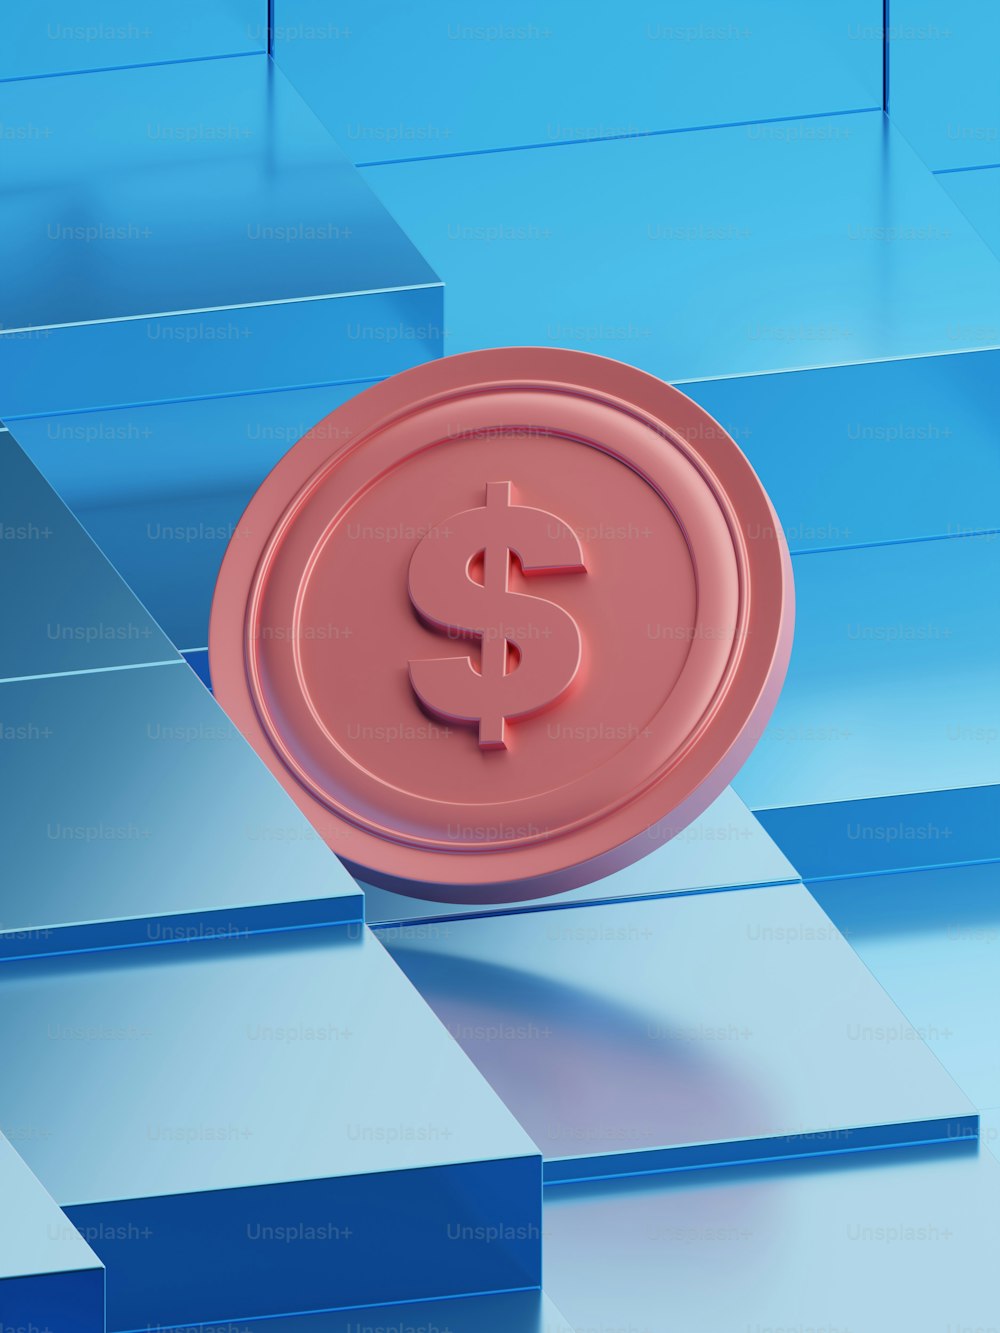 a red dollar sign sitting on top of a blue background